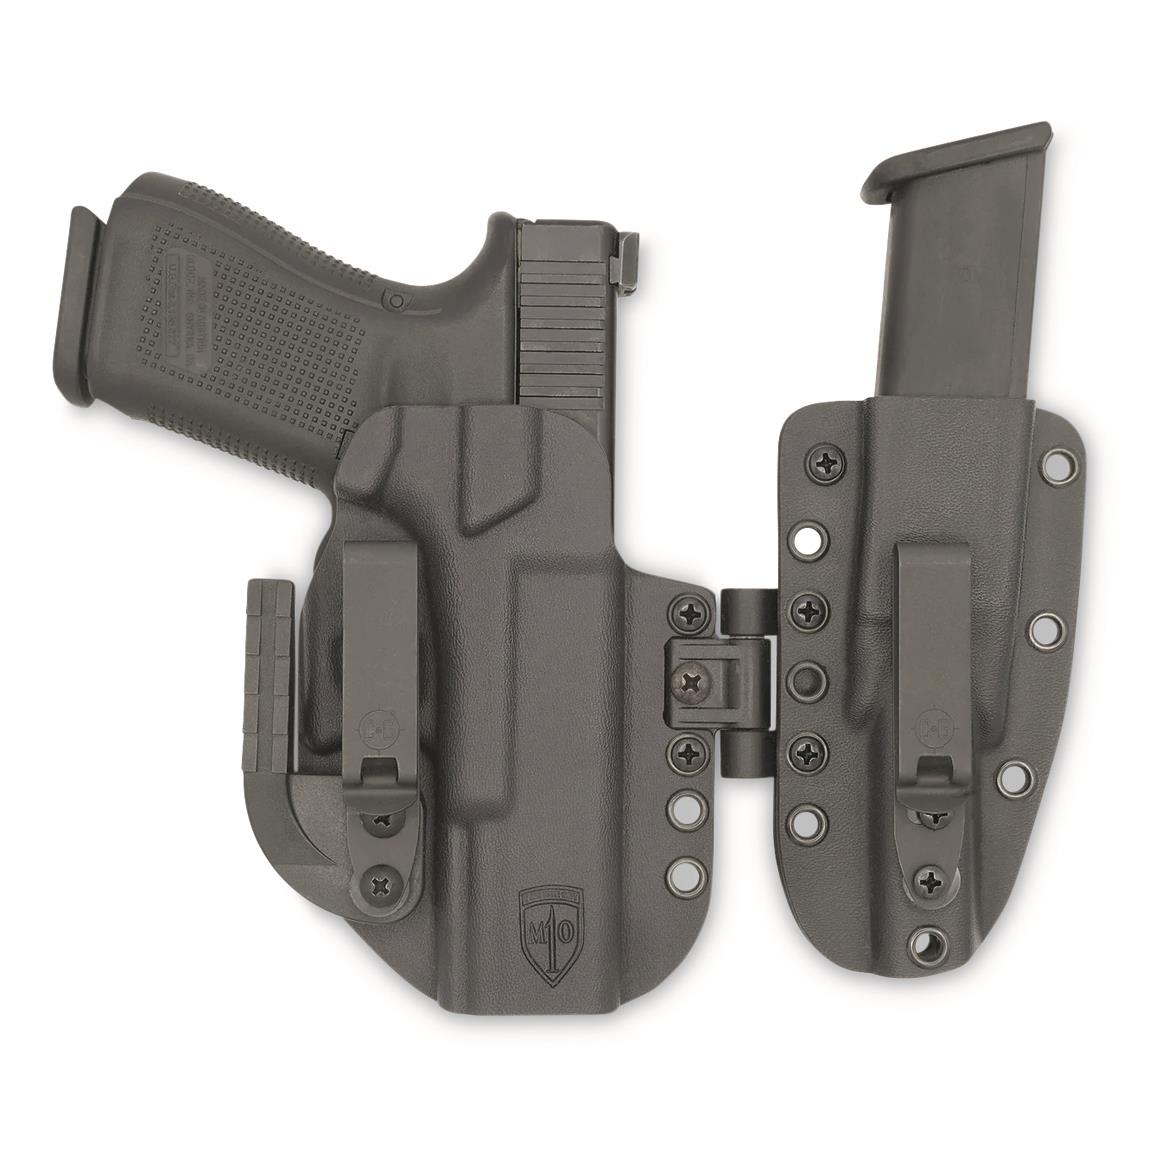 C&G Holsters MOD1-Lima IWB Kydex Holster System, SIG SAUER P320 Compact